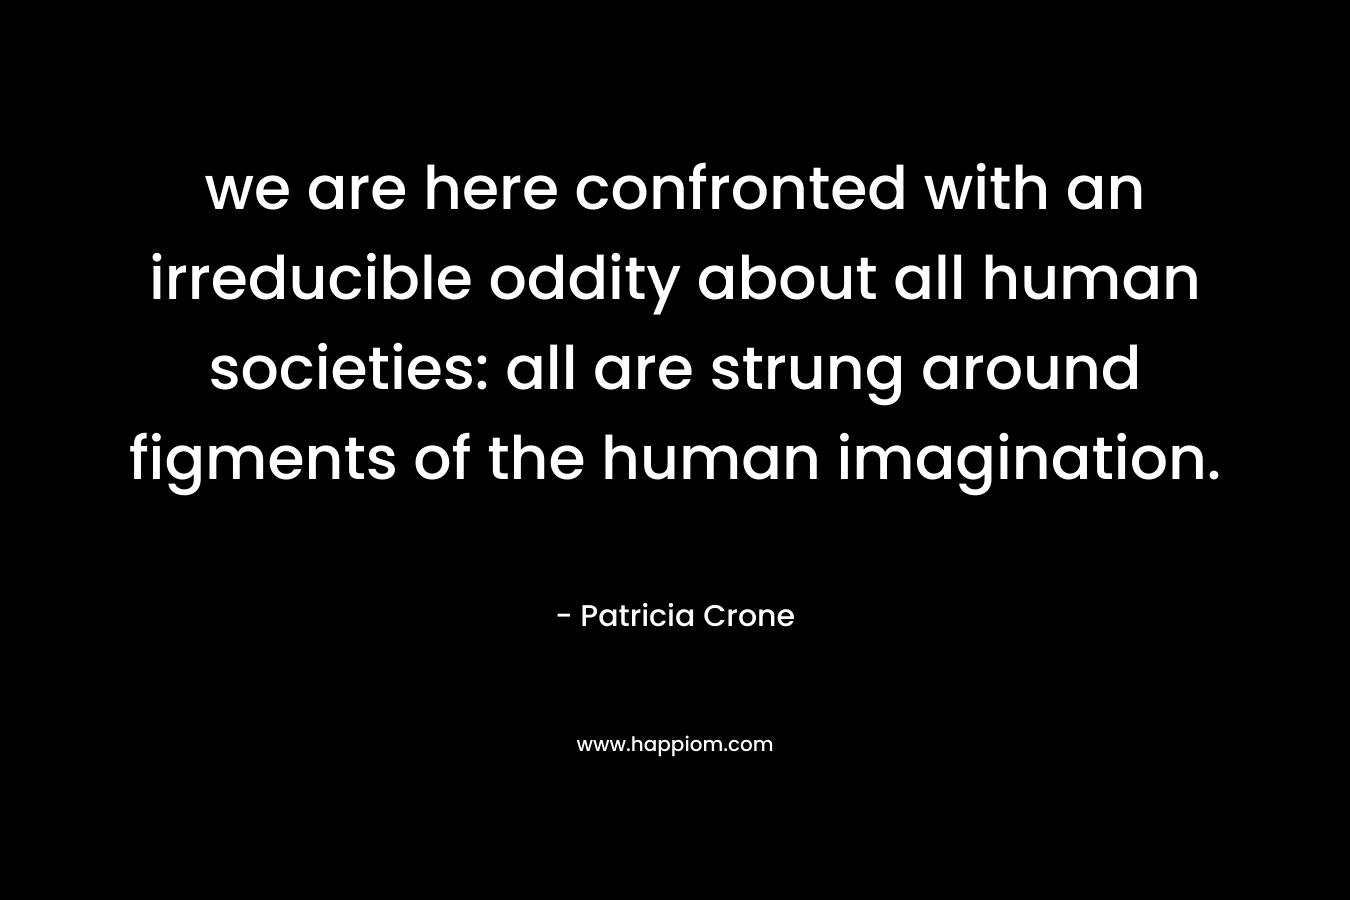 we are here confronted with an irreducible oddity about all human societies: all are strung around figments of the human imagination.